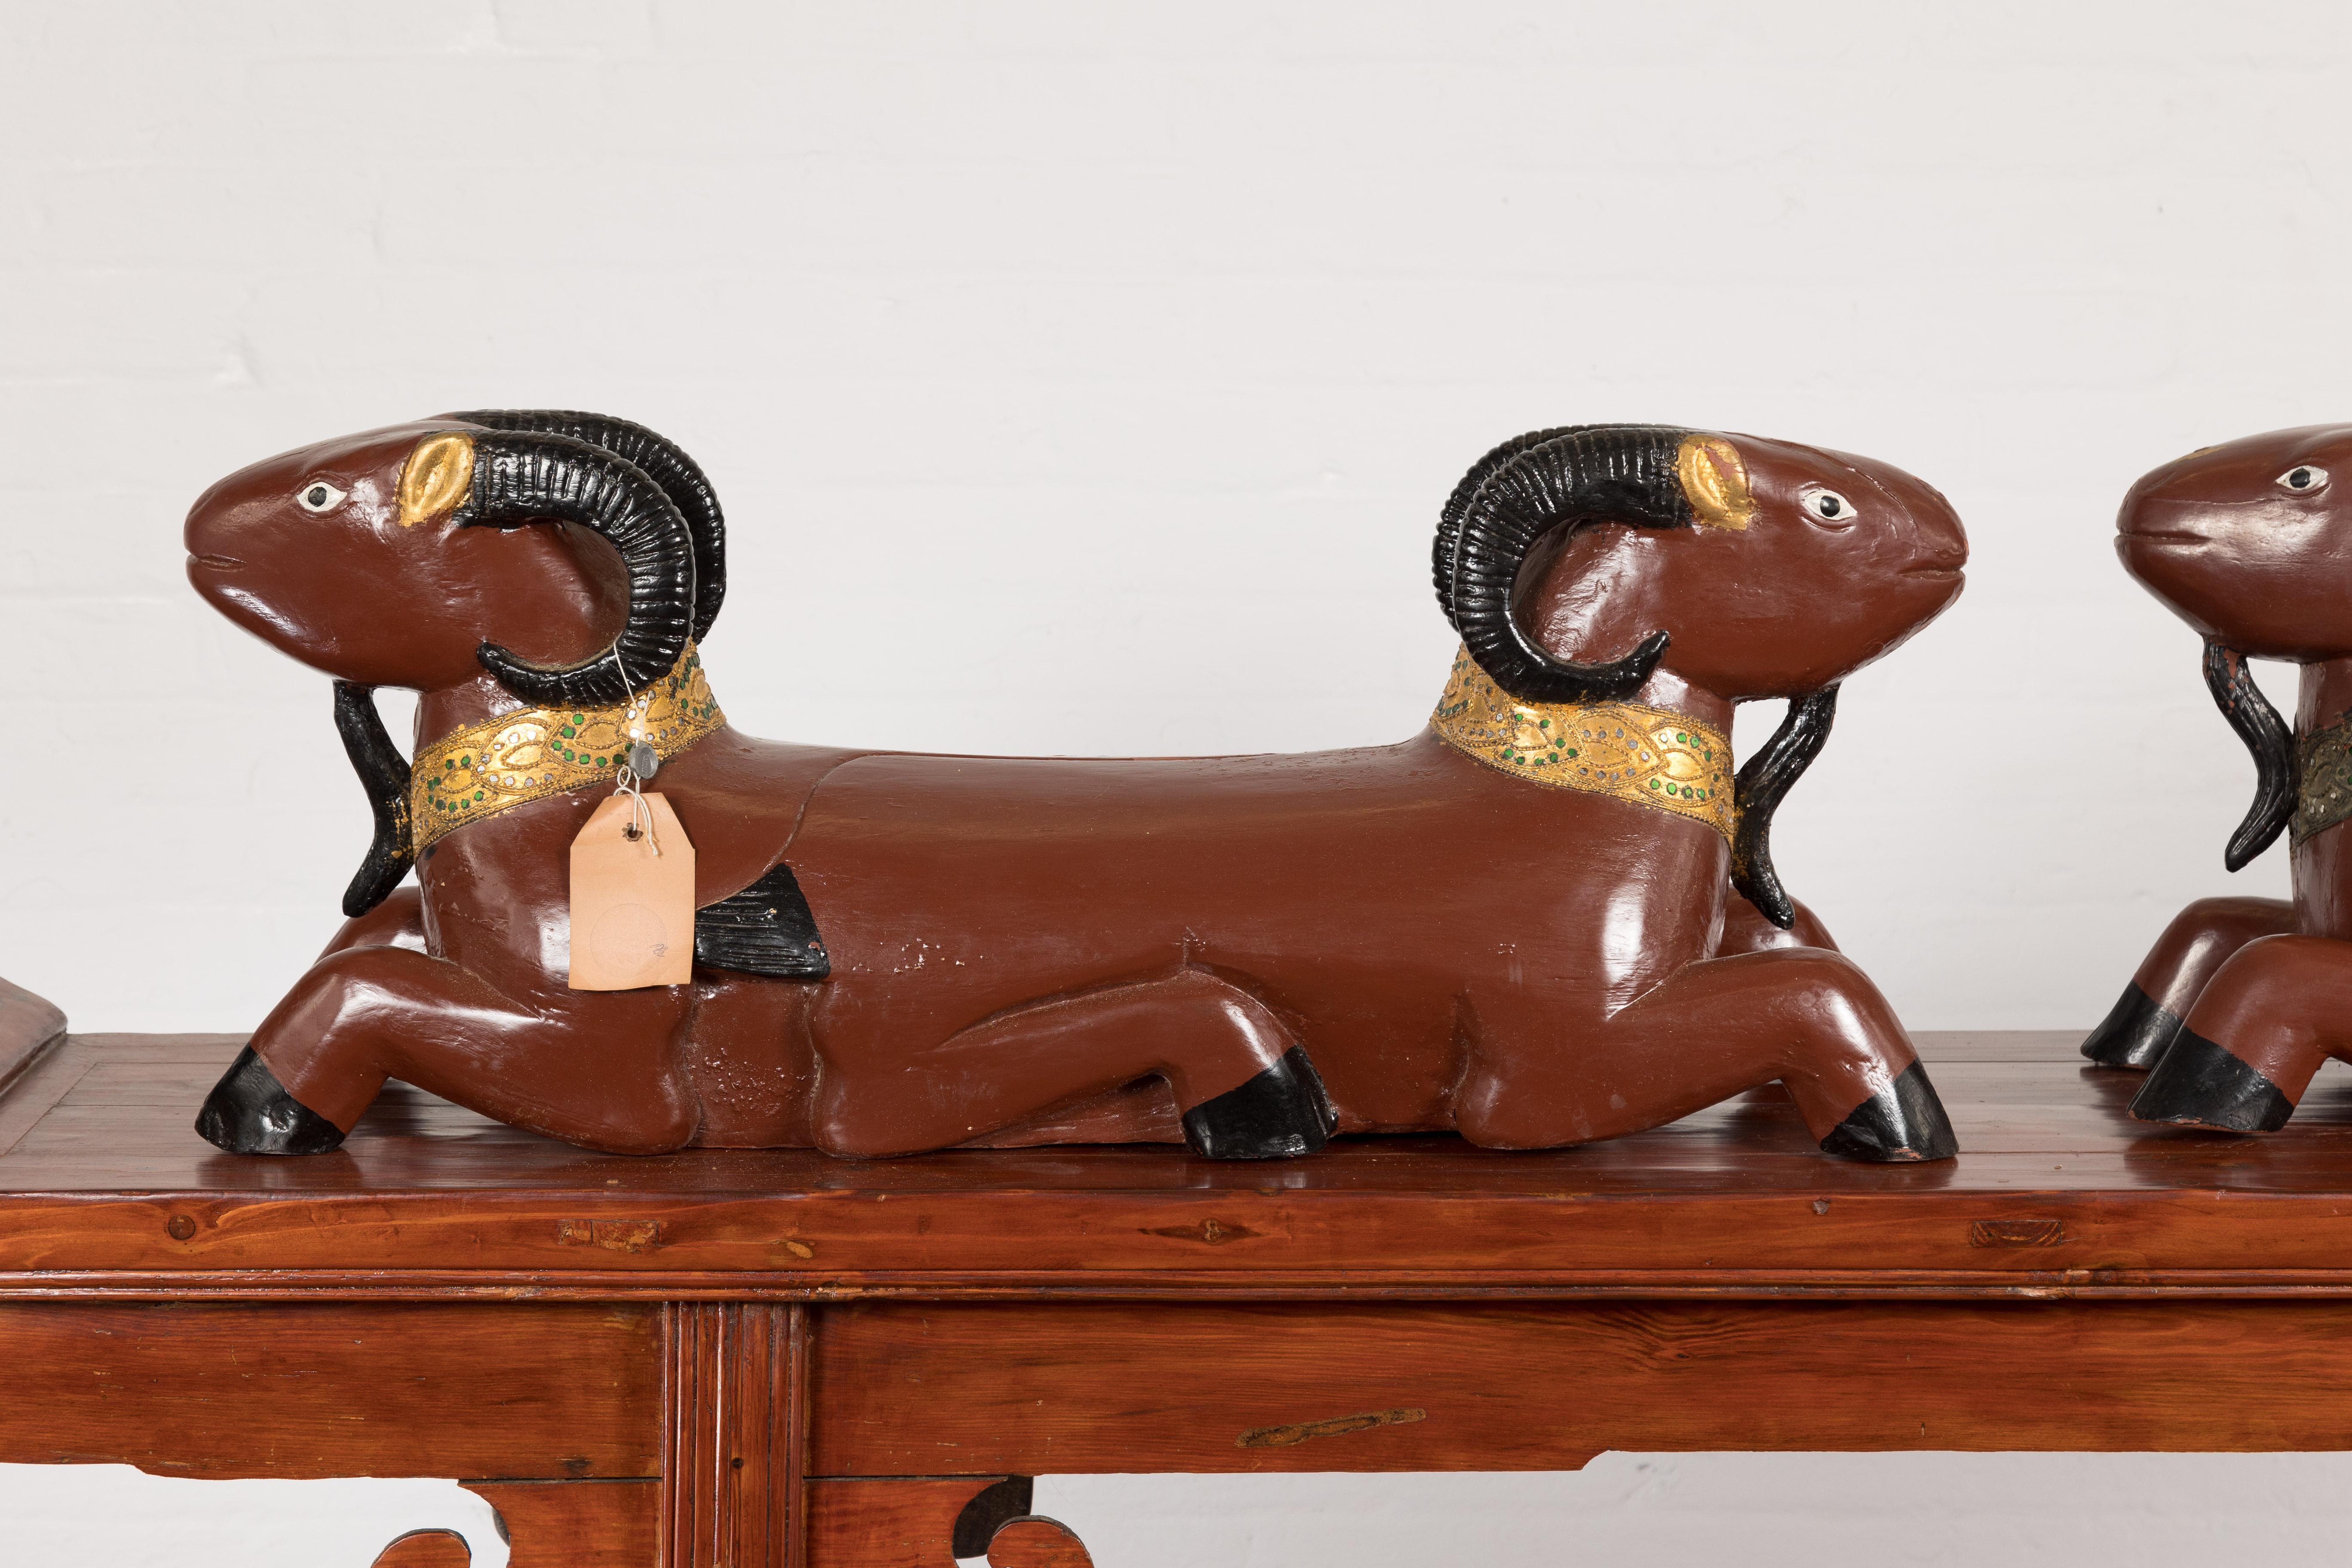 Pair of Vintage Northern Thai Double Ram Sculptures with Reddish Brown Lacquer In Good Condition For Sale In Yonkers, NY